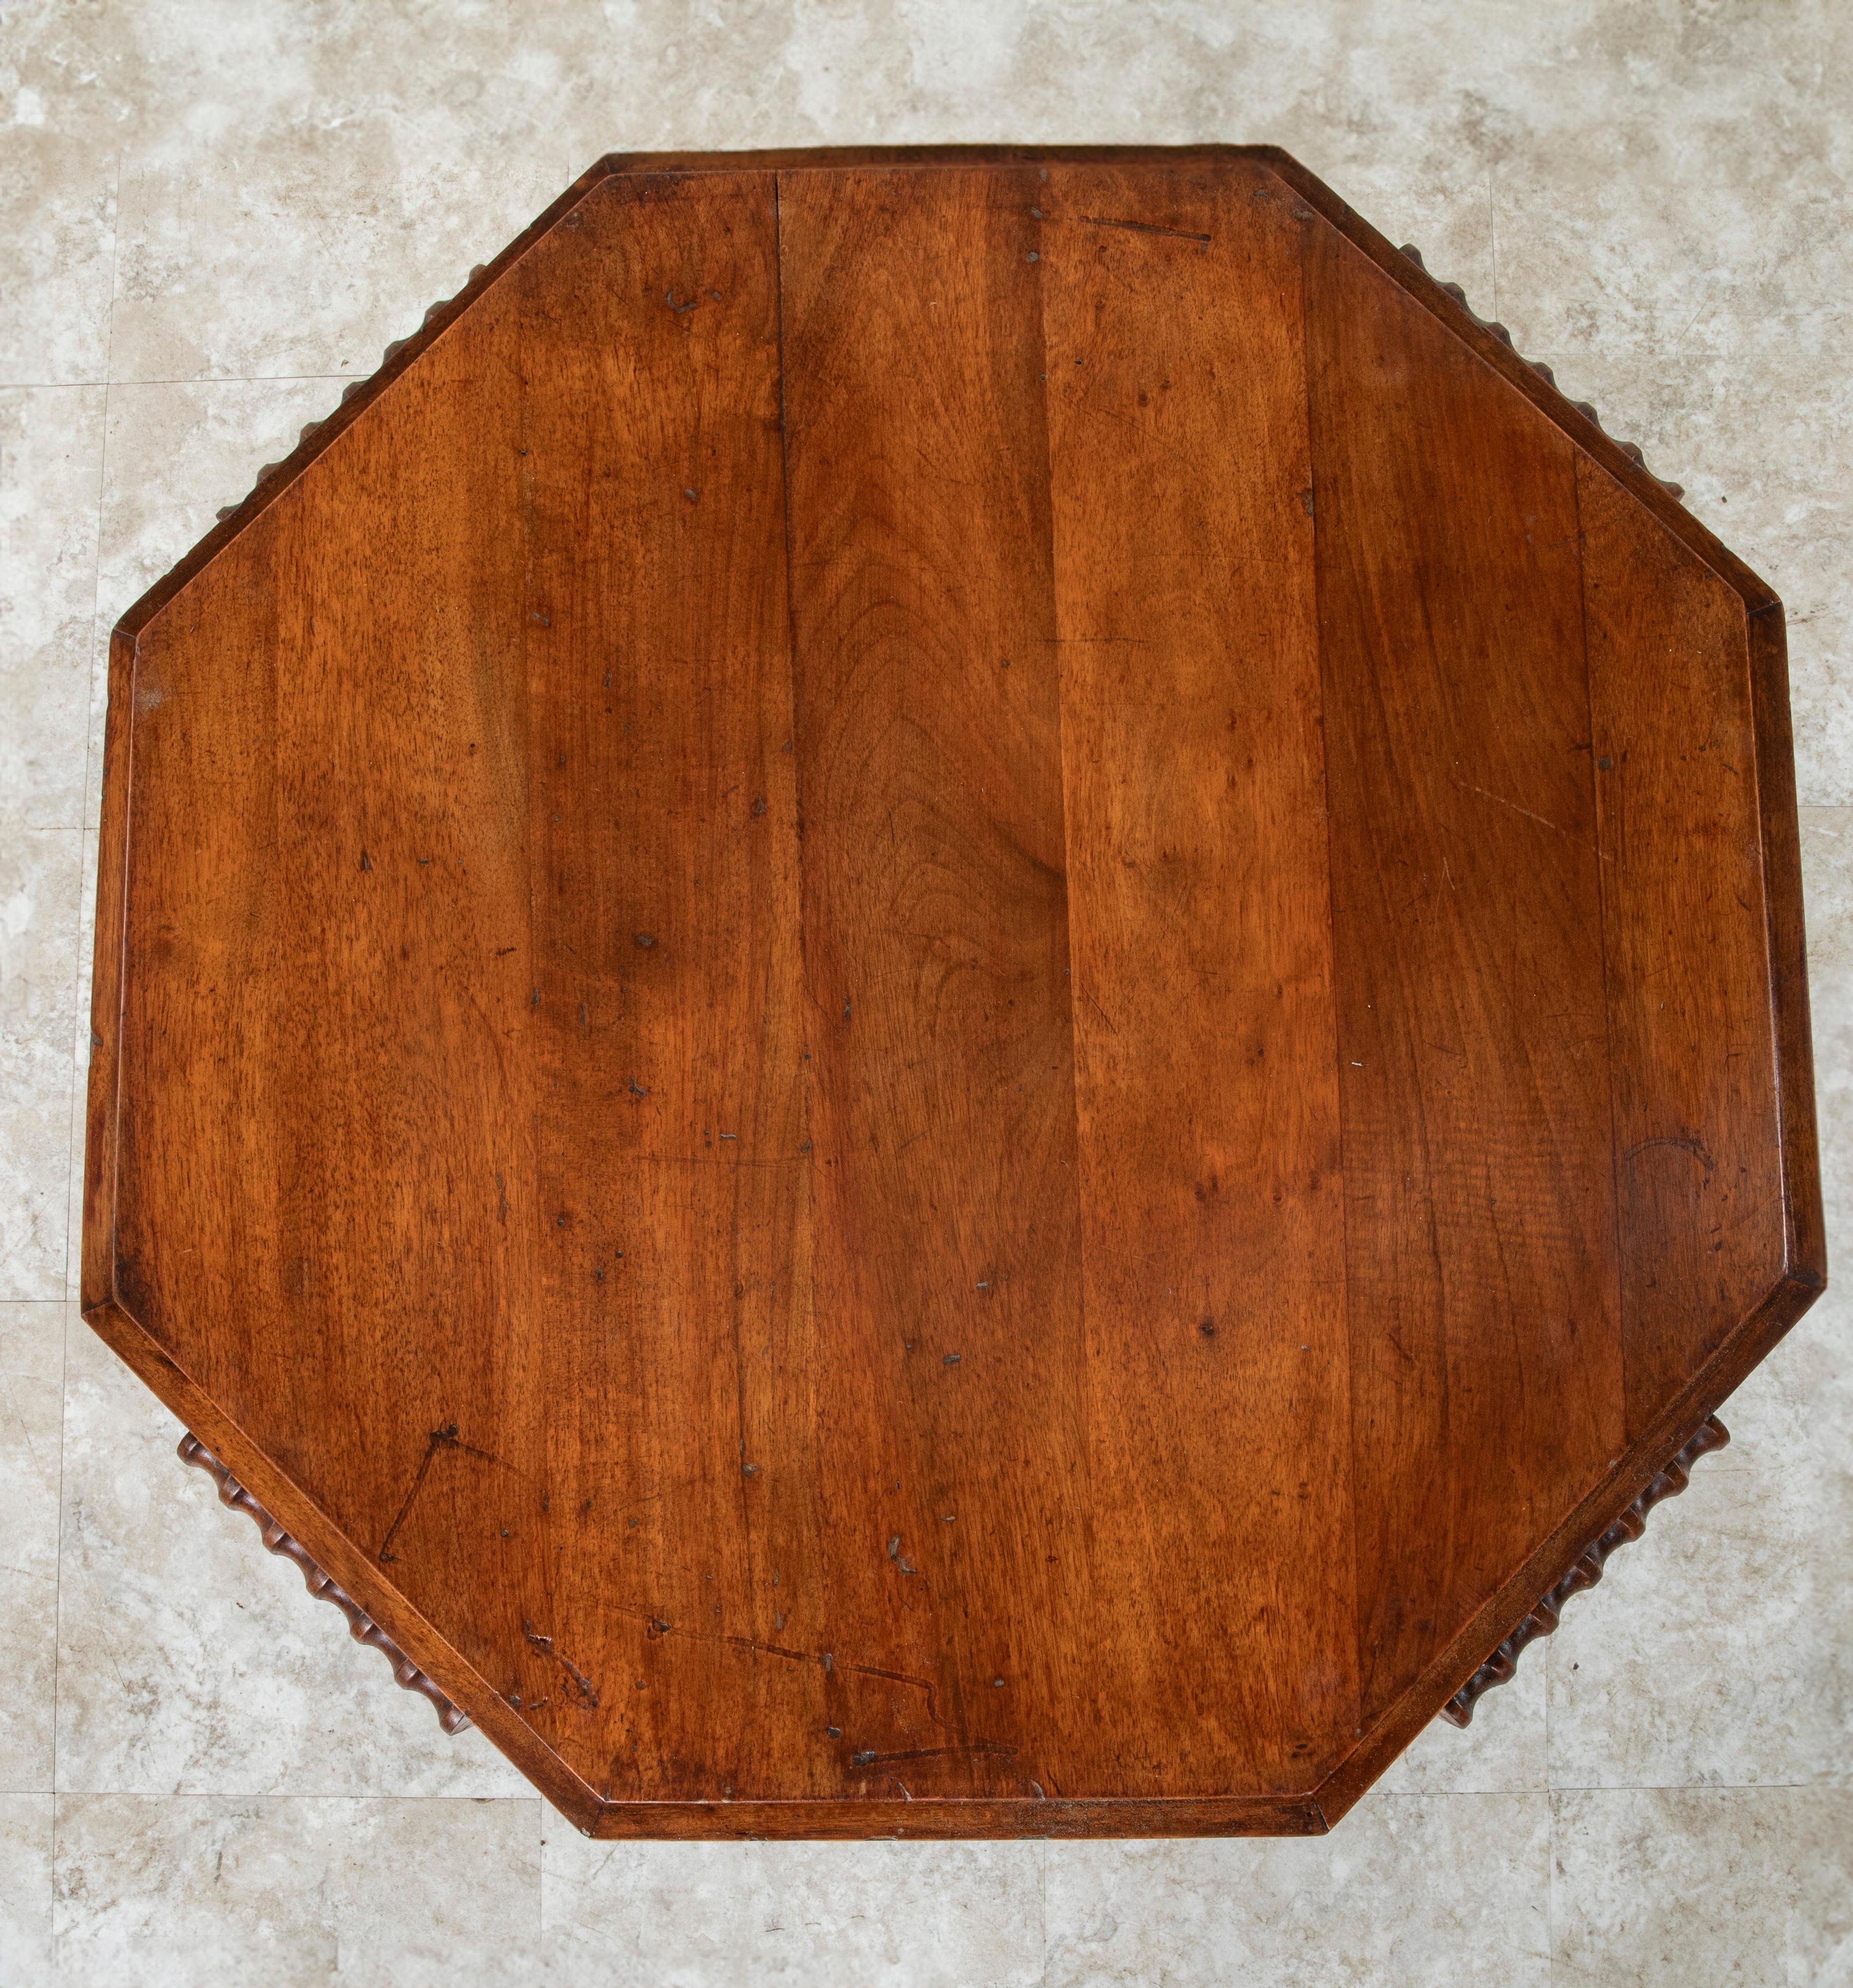 Early 20th Century French Art Deco Period Walnut Coffee Table or Cocktail Table For Sale 3